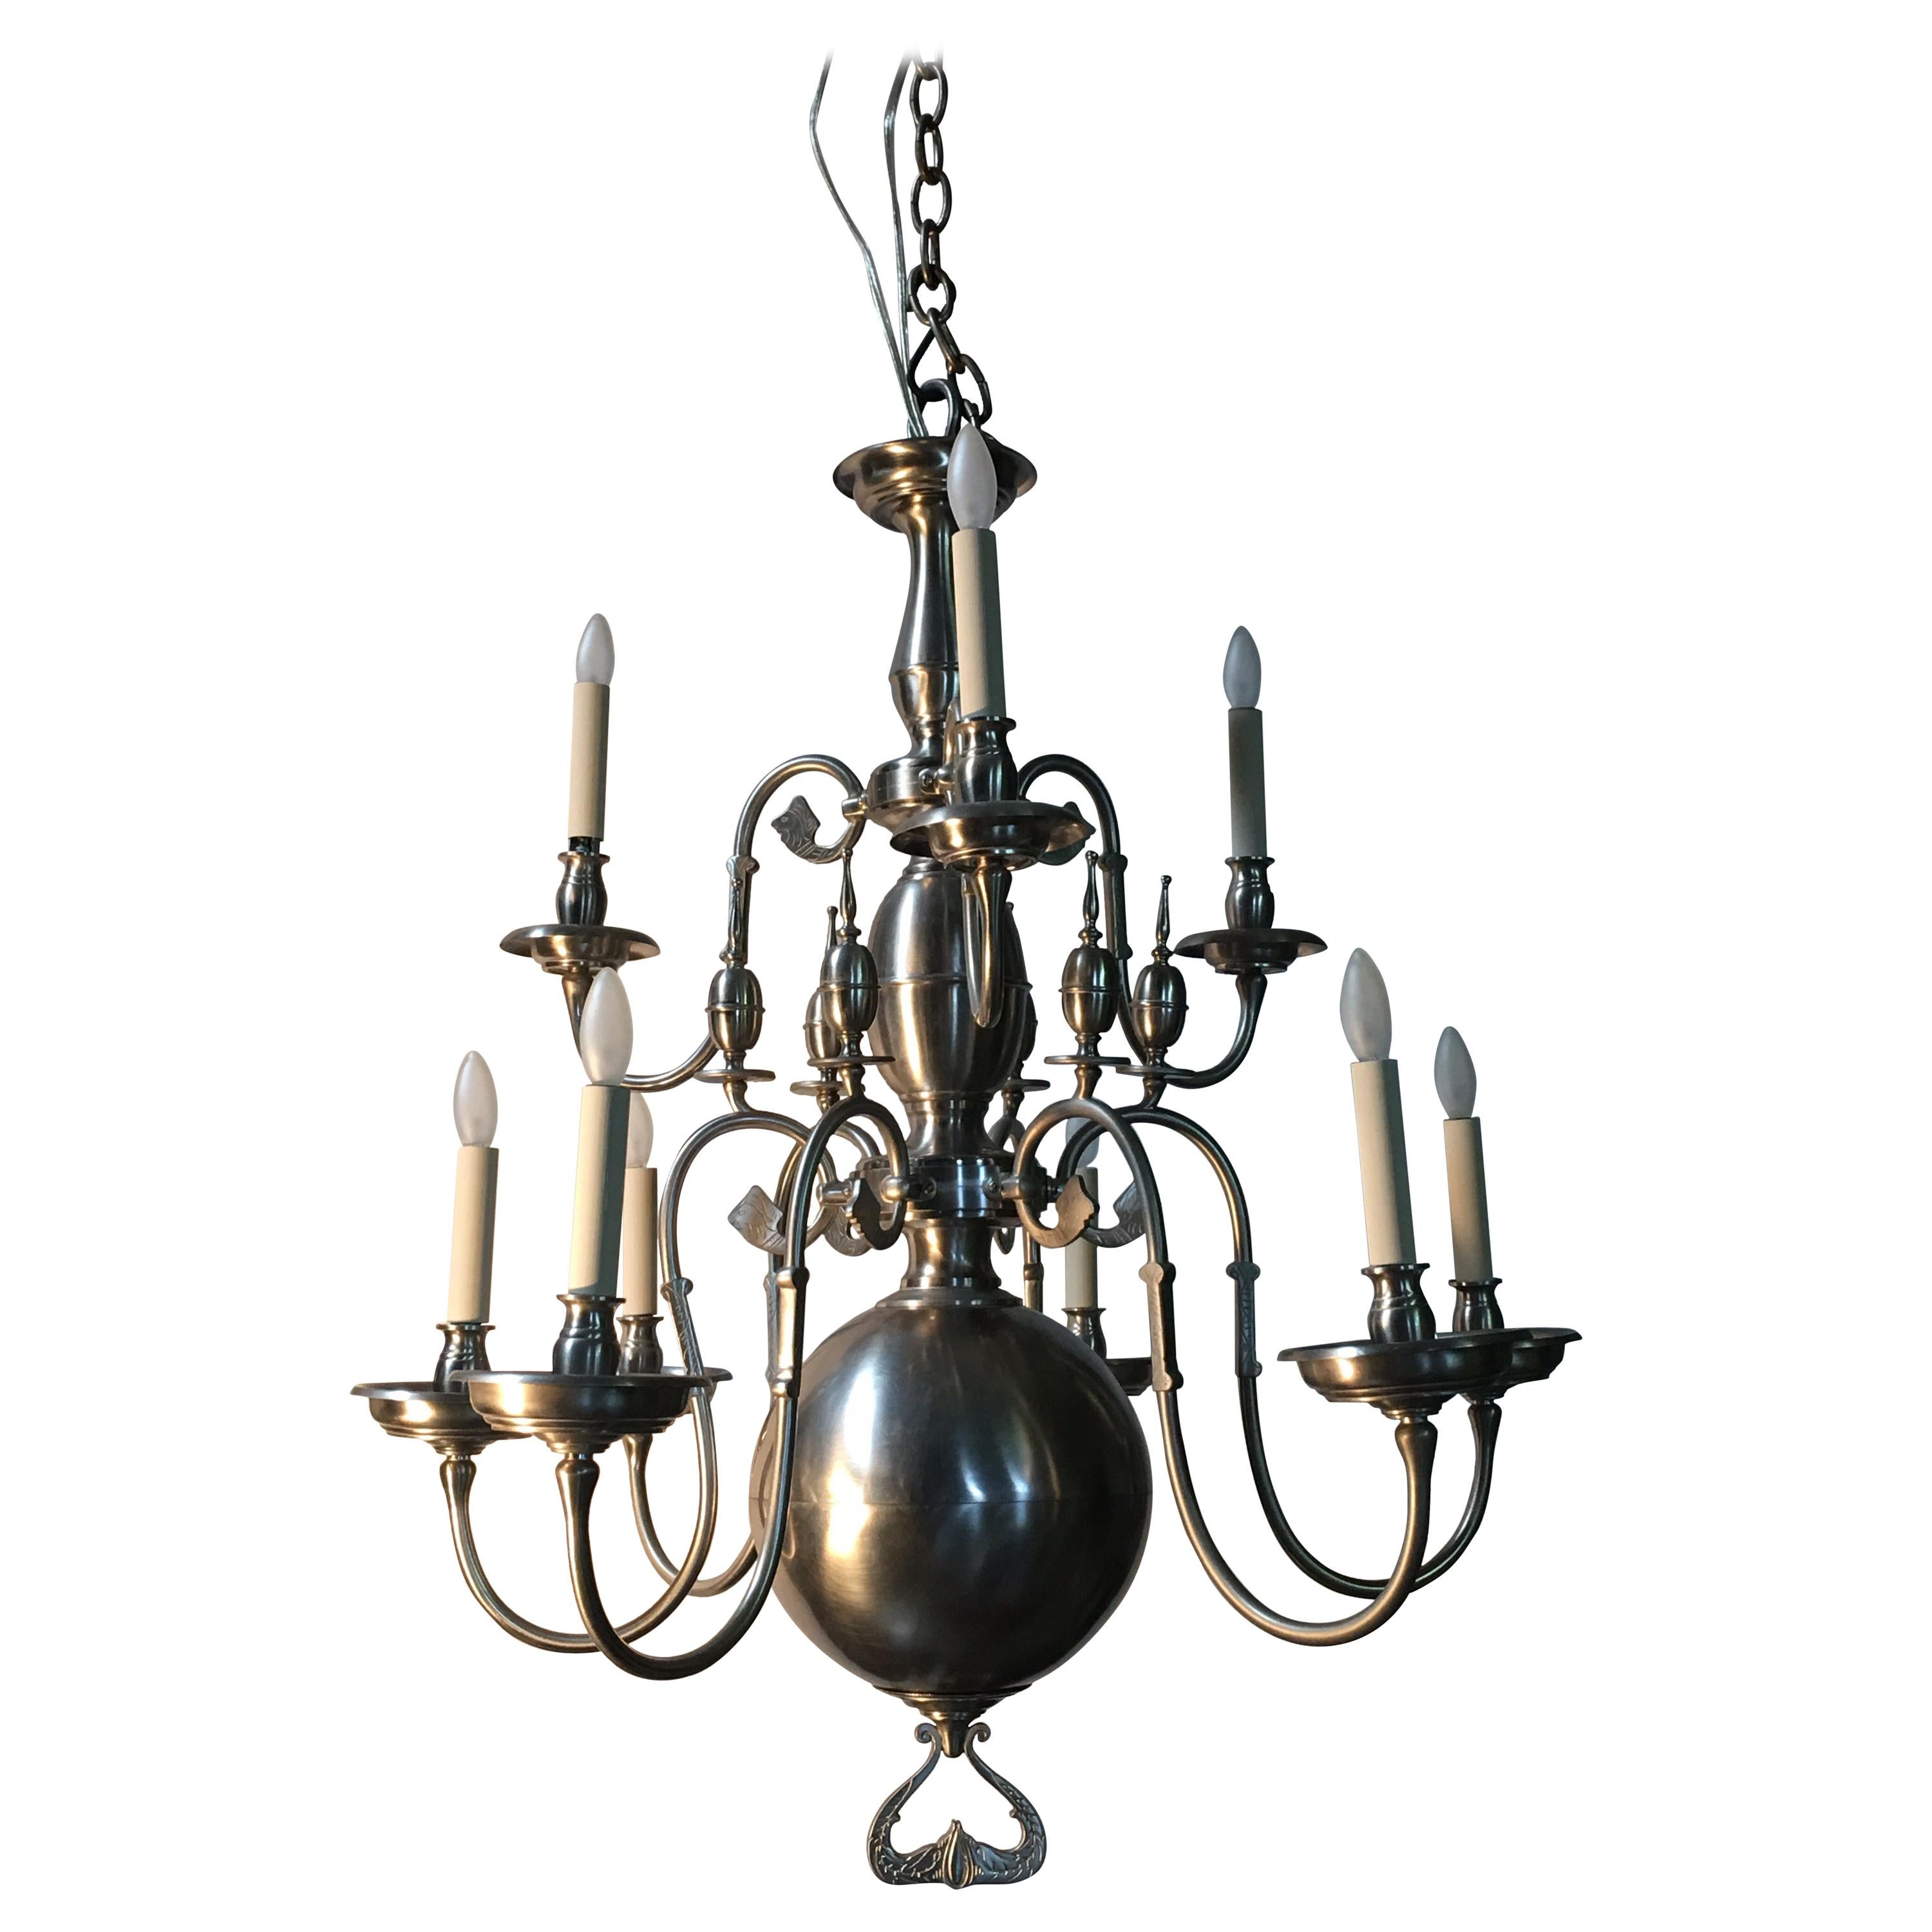 19th Century Flemish Chandelier with a Pewter Finish For Sale